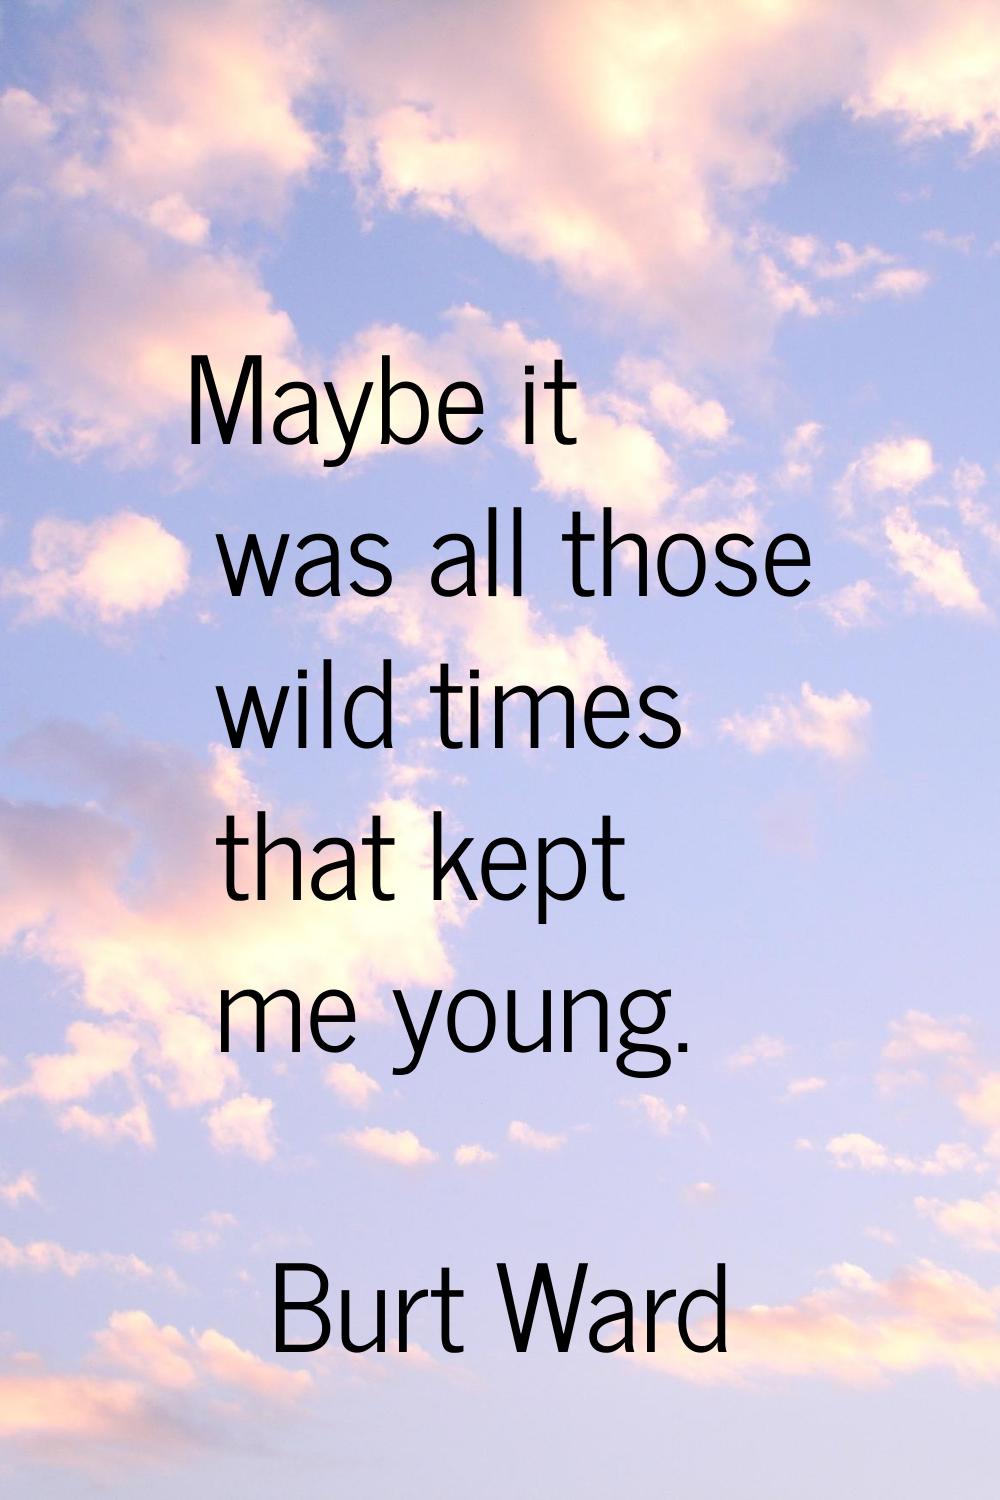 Maybe it was all those wild times that kept me young.